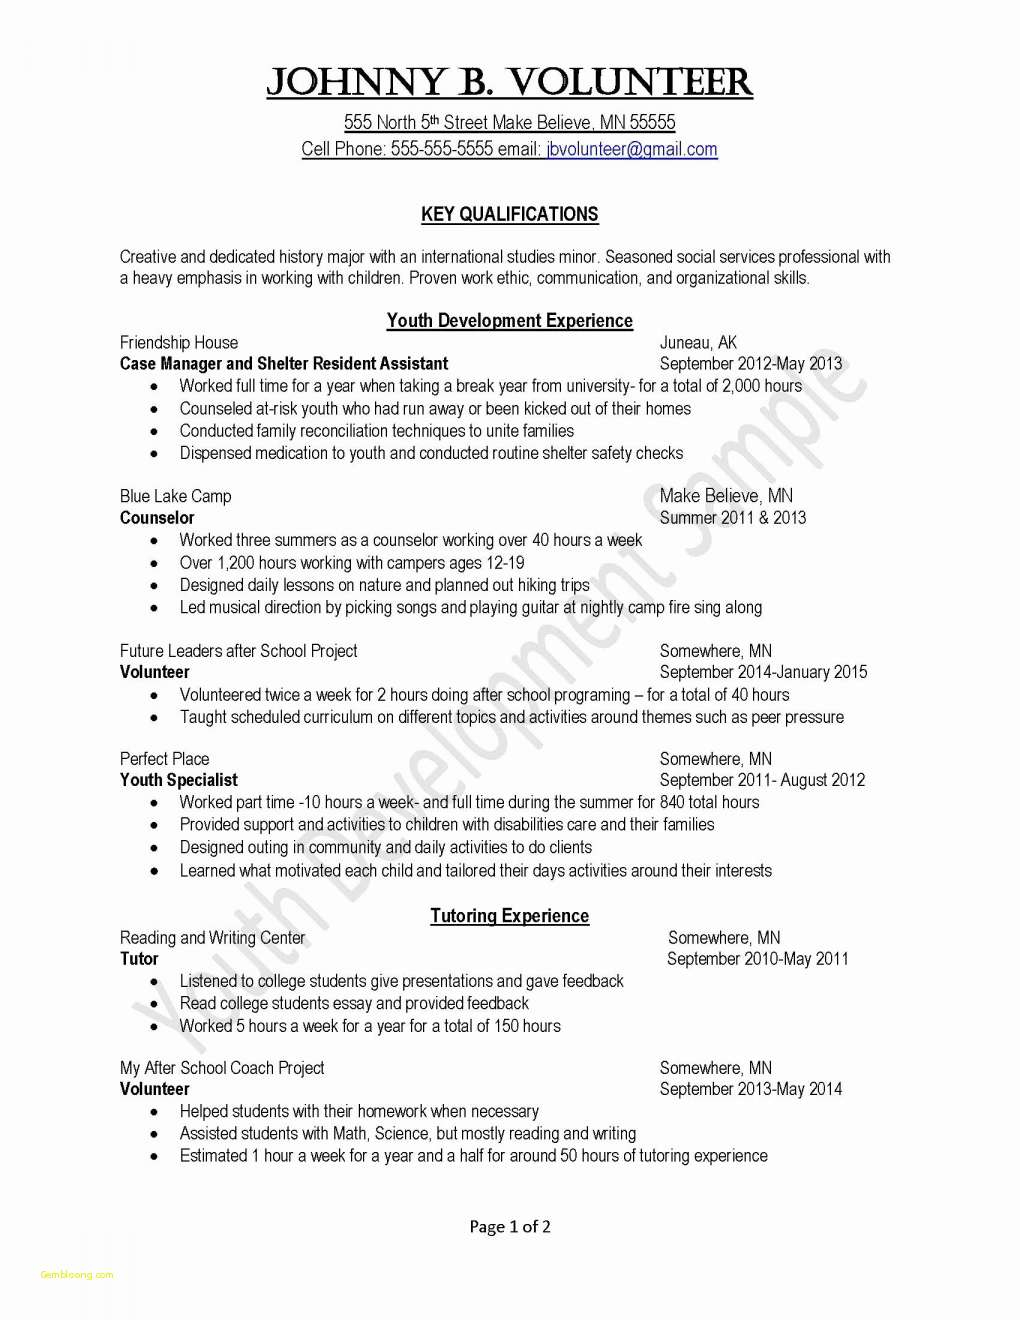 Cover Letter Template Google Docs - Free Resume Templates for Students Takenosumi